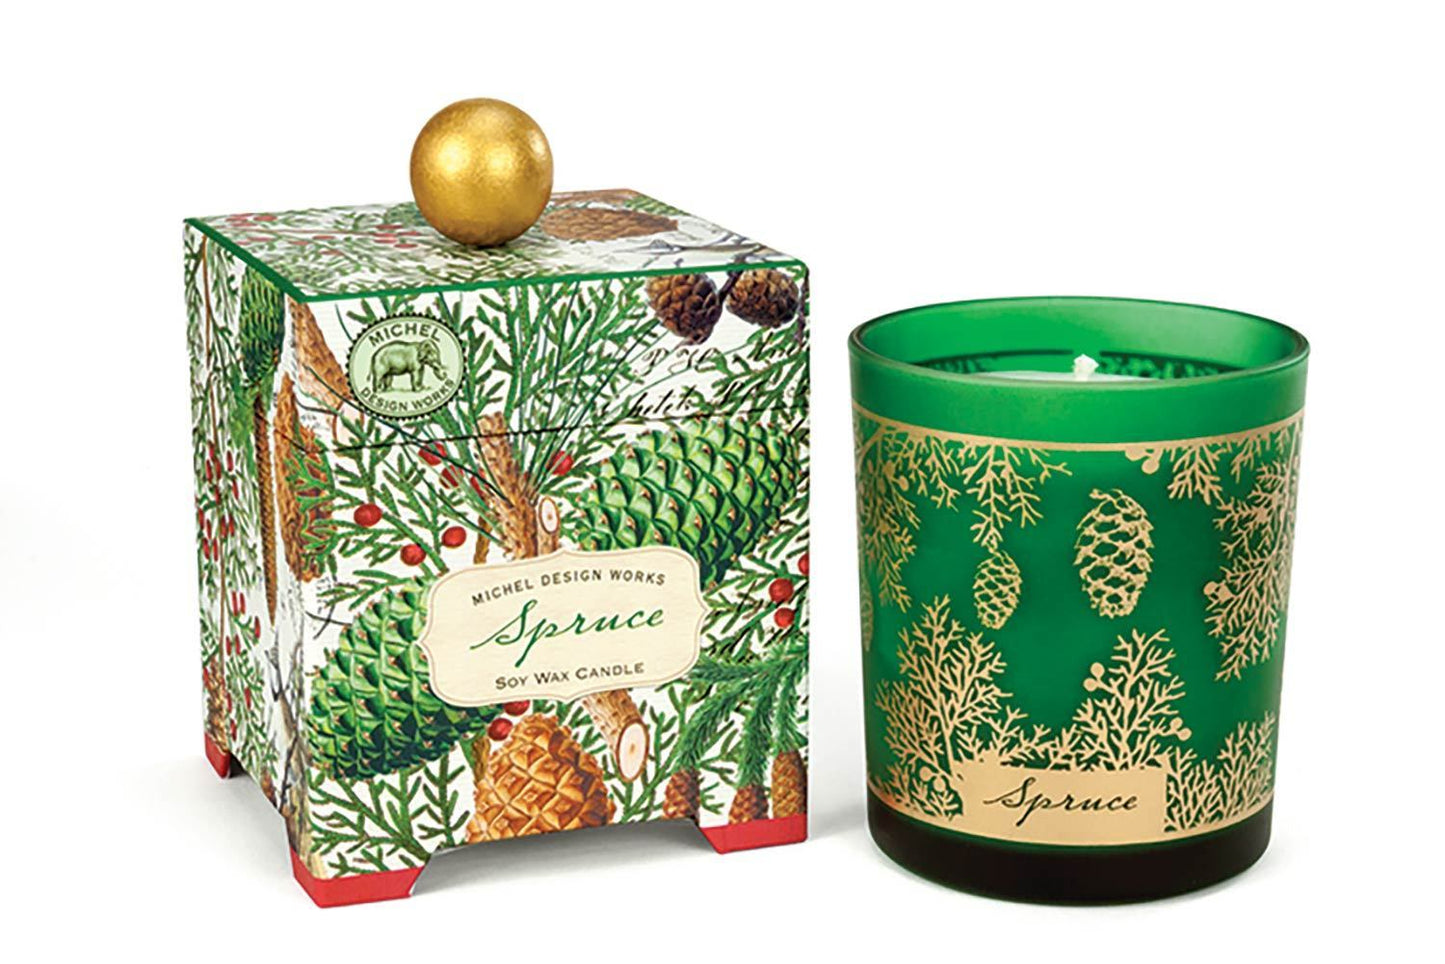 Spruce 6.5 oz. Soy Wax Candle True Spruce Fragrance with Subtle Fruit and Spice Undertones